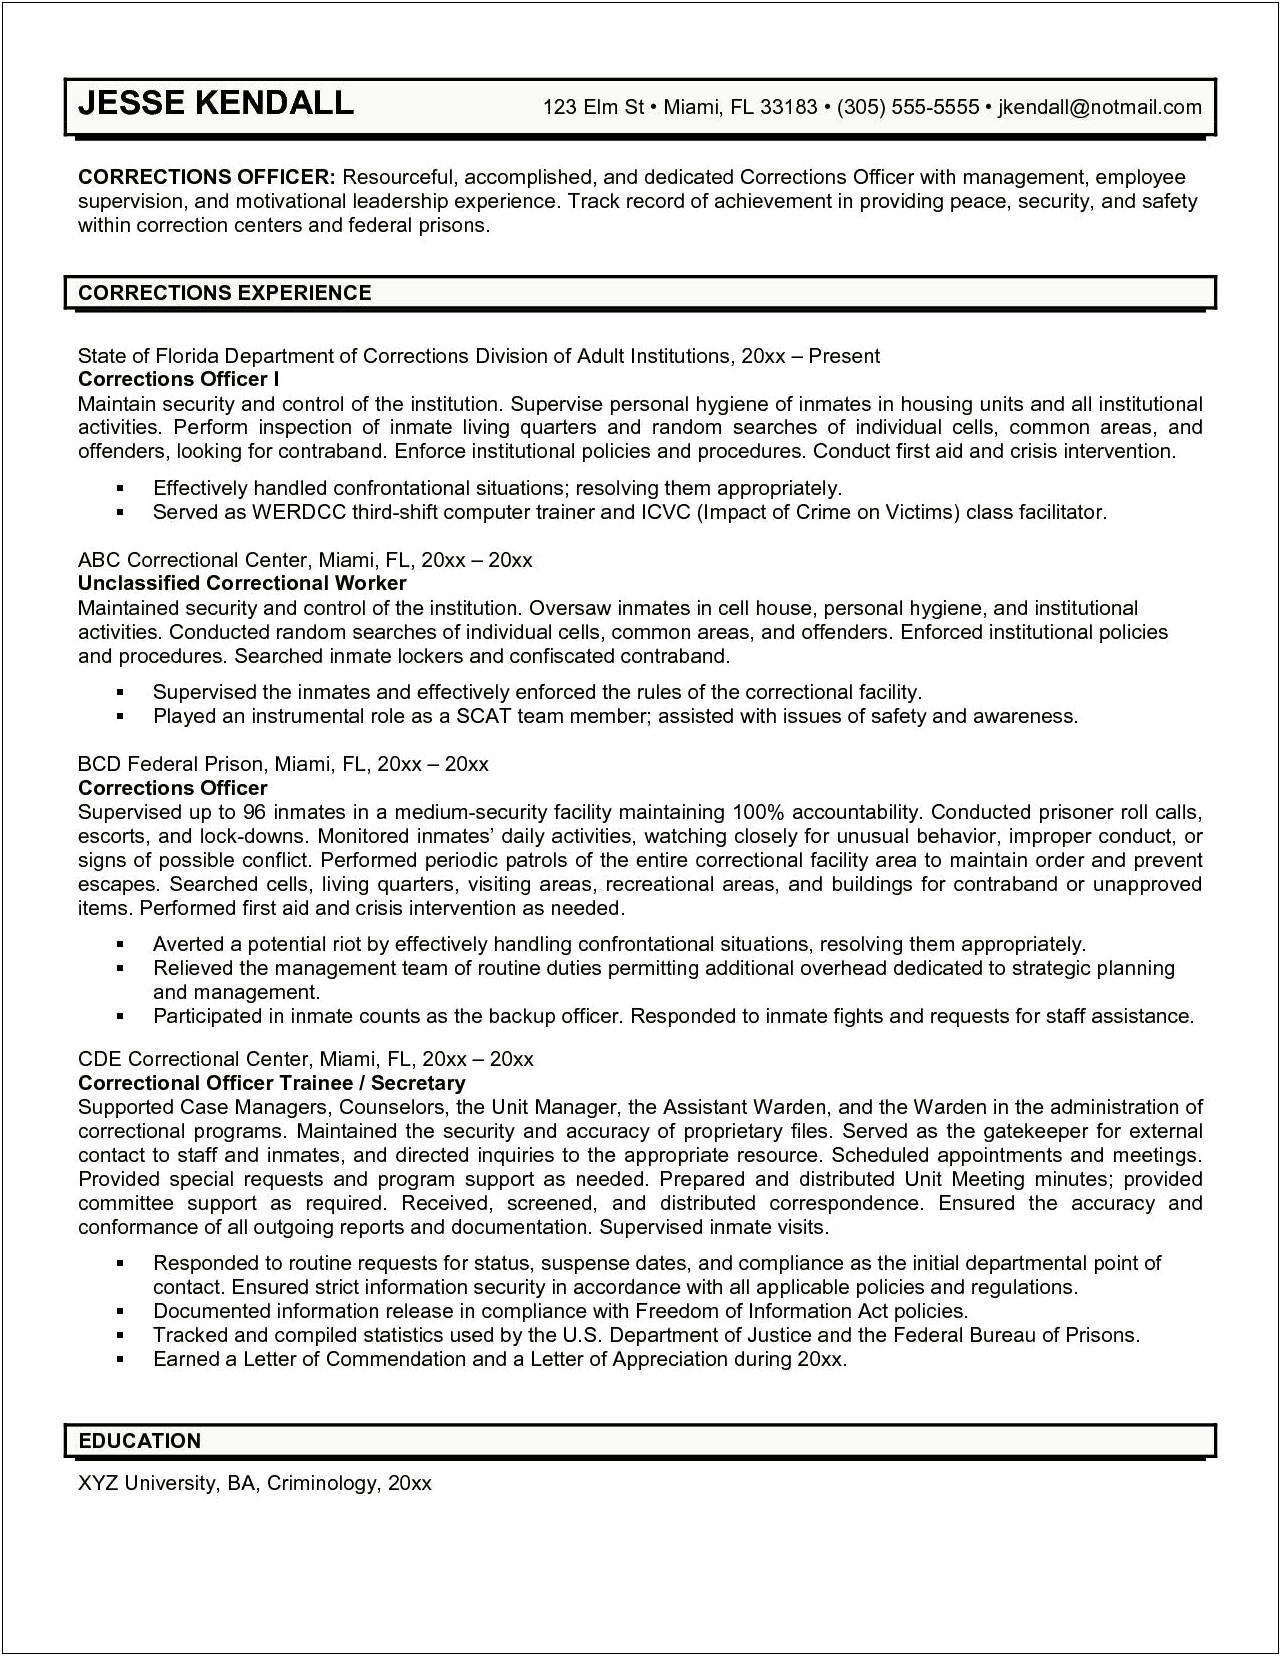 Correctional Officer Resume With No Experience